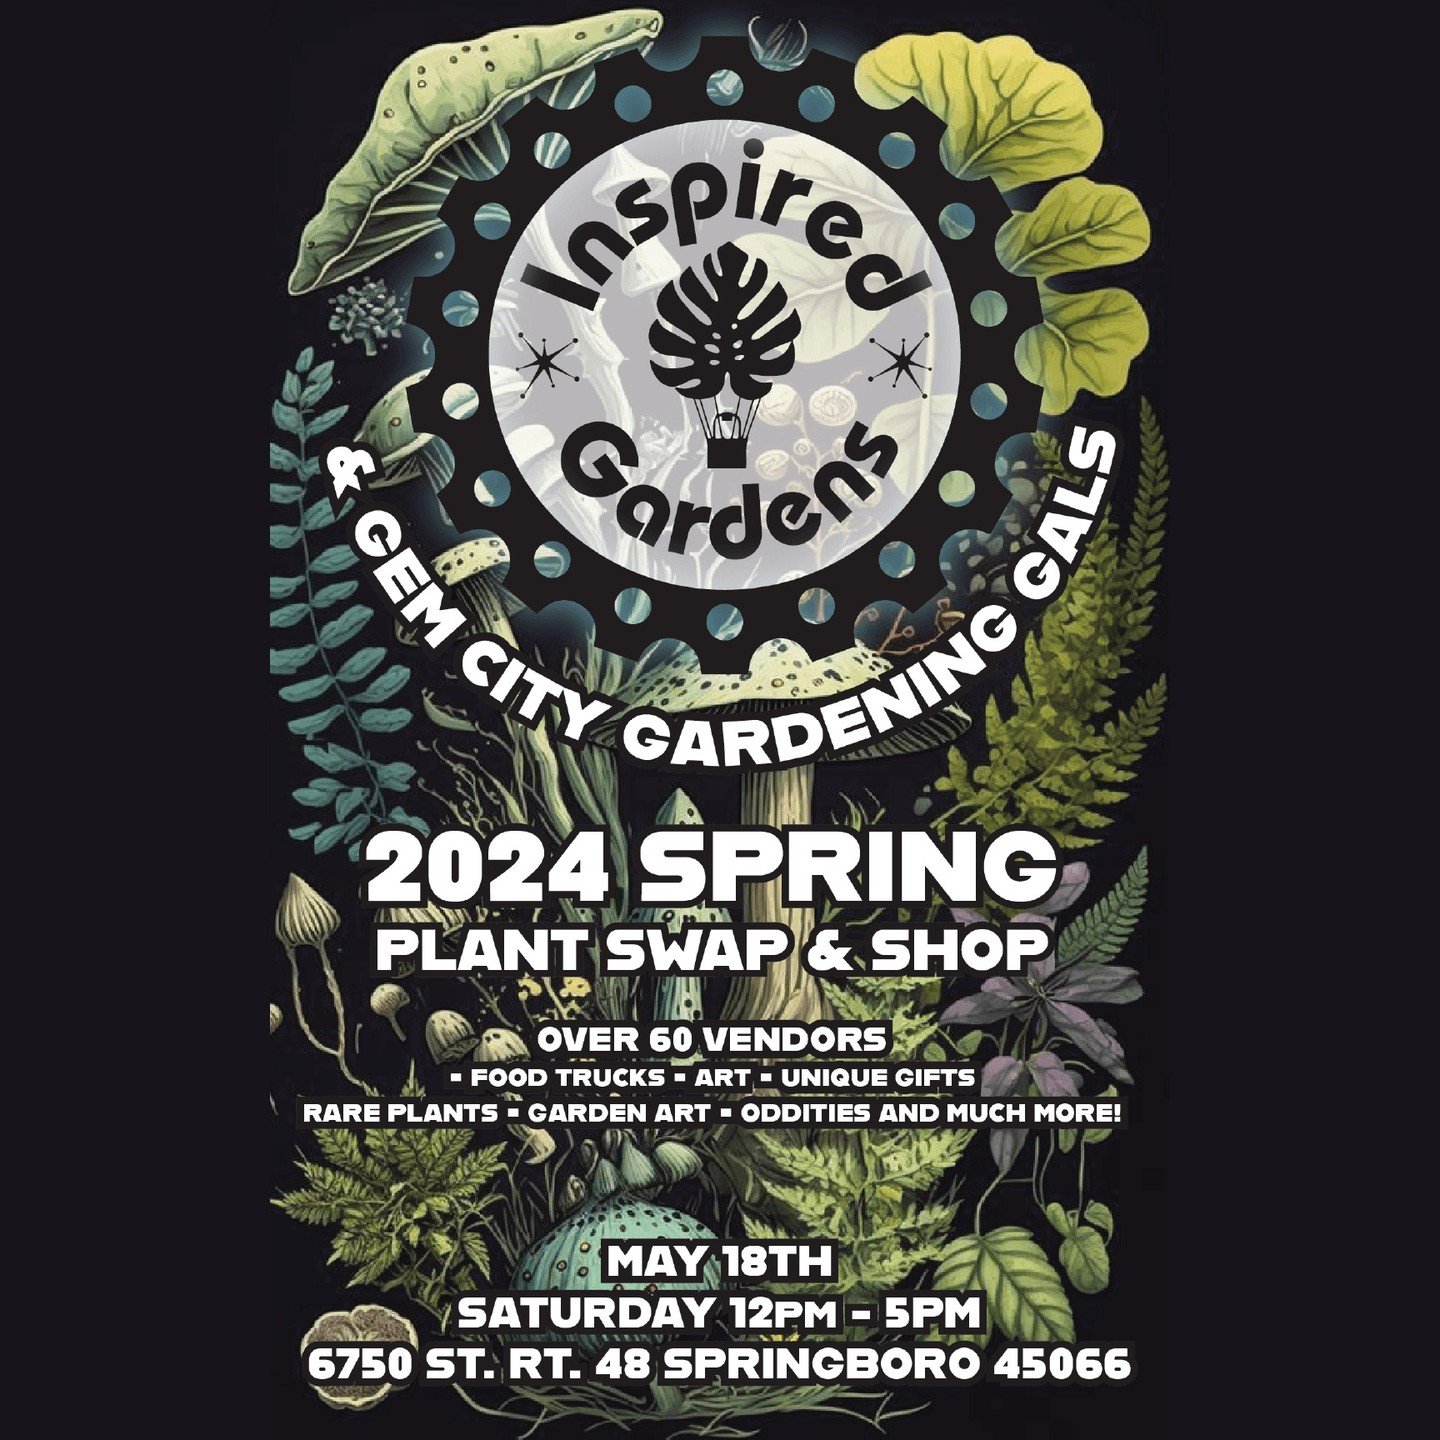 Join us at the @gemcitygardeninggals_ Spring Swap &amp; Shop on May 18th from 12-5 PM at @inspired_gardens_llc in Springboro, Ohio 🎉

🌿 With 60 vendors, food trucks, art, unique gifts, rare plants, garden art, oddities, and so much more, this event